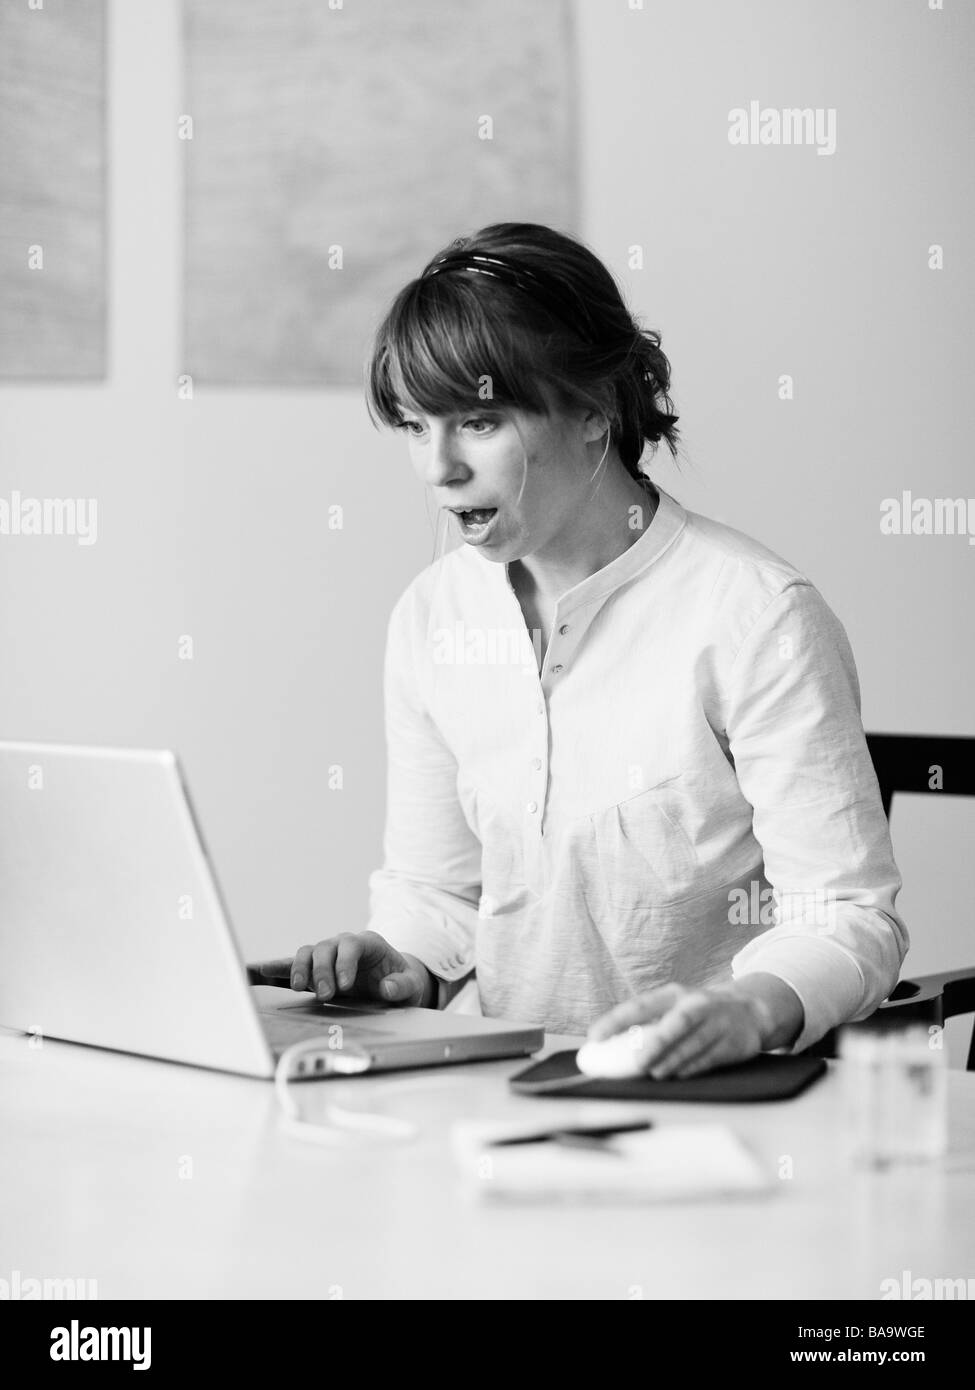 A surprised woman using a laptop, Sweden. Stock Photo